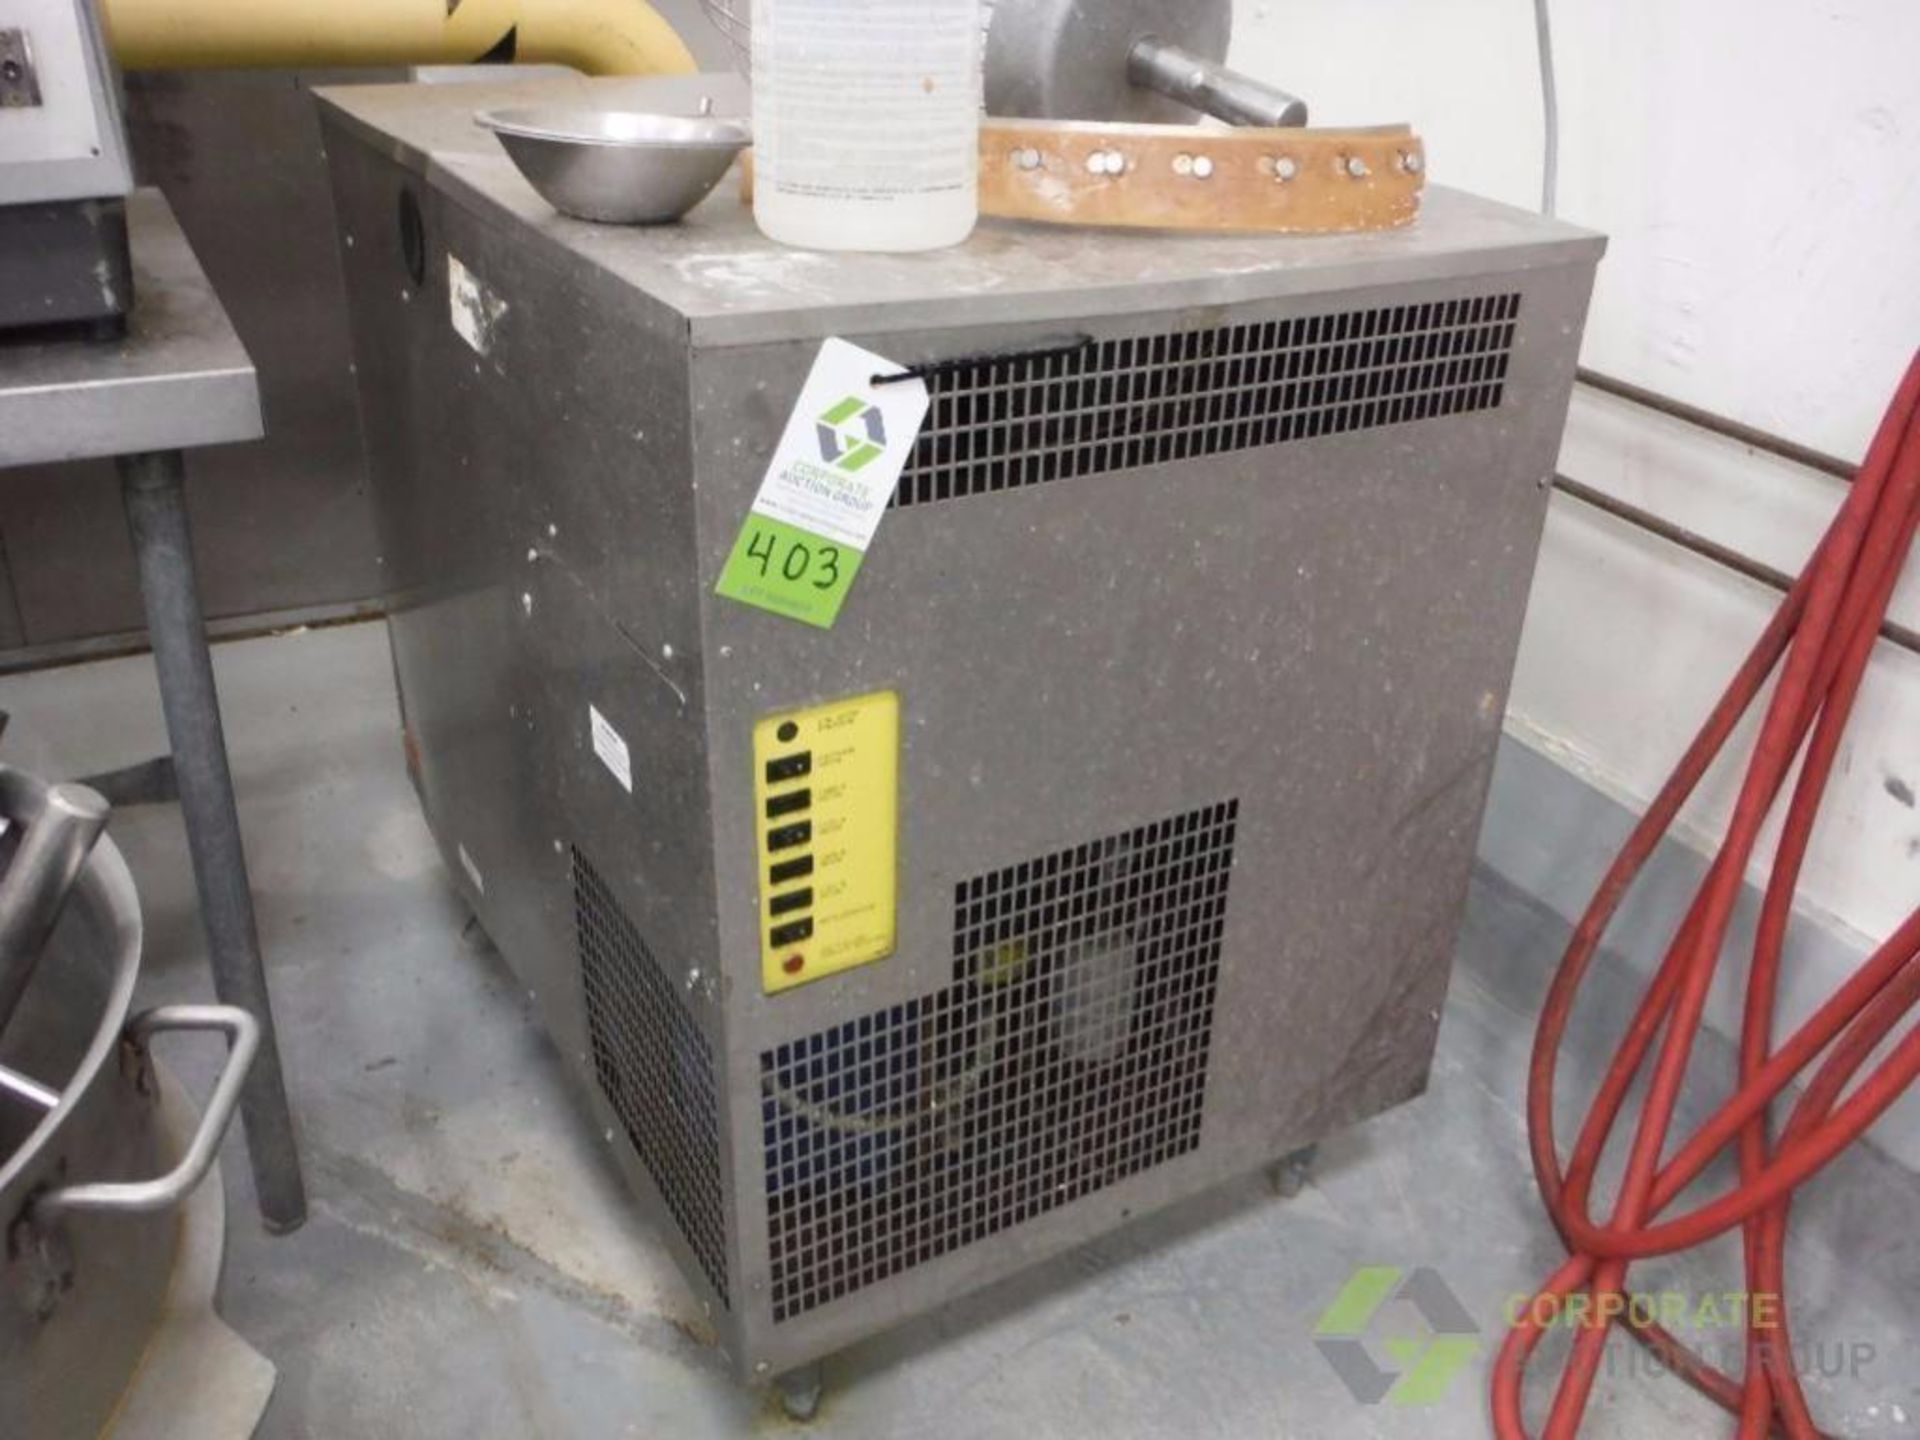 Multiplex Refrigeration Unit, Model: SC2000A, S/N: OdO-036022, By Manitowic. **(Located in Pico Rive